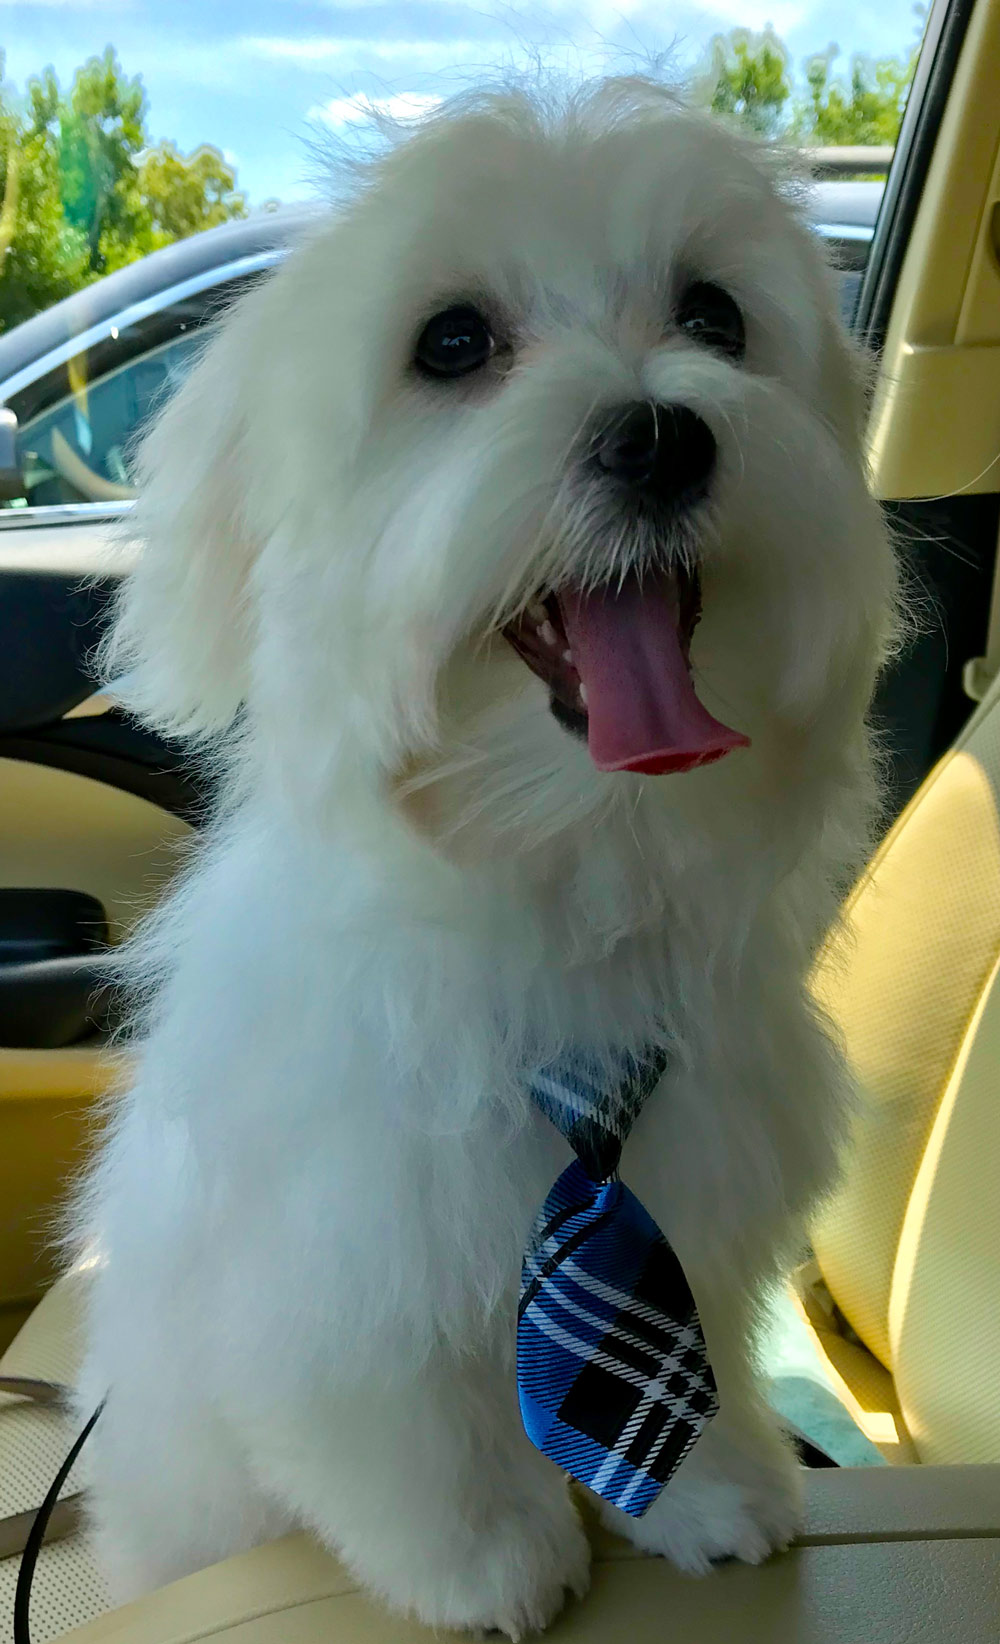 Meet Cooper, Karen’s Maltese, fresh from the groomer. He looks quite handsome with his new tie. Five months old, and he RULES the house. That’s the way it is for the “only child” pet in her family!